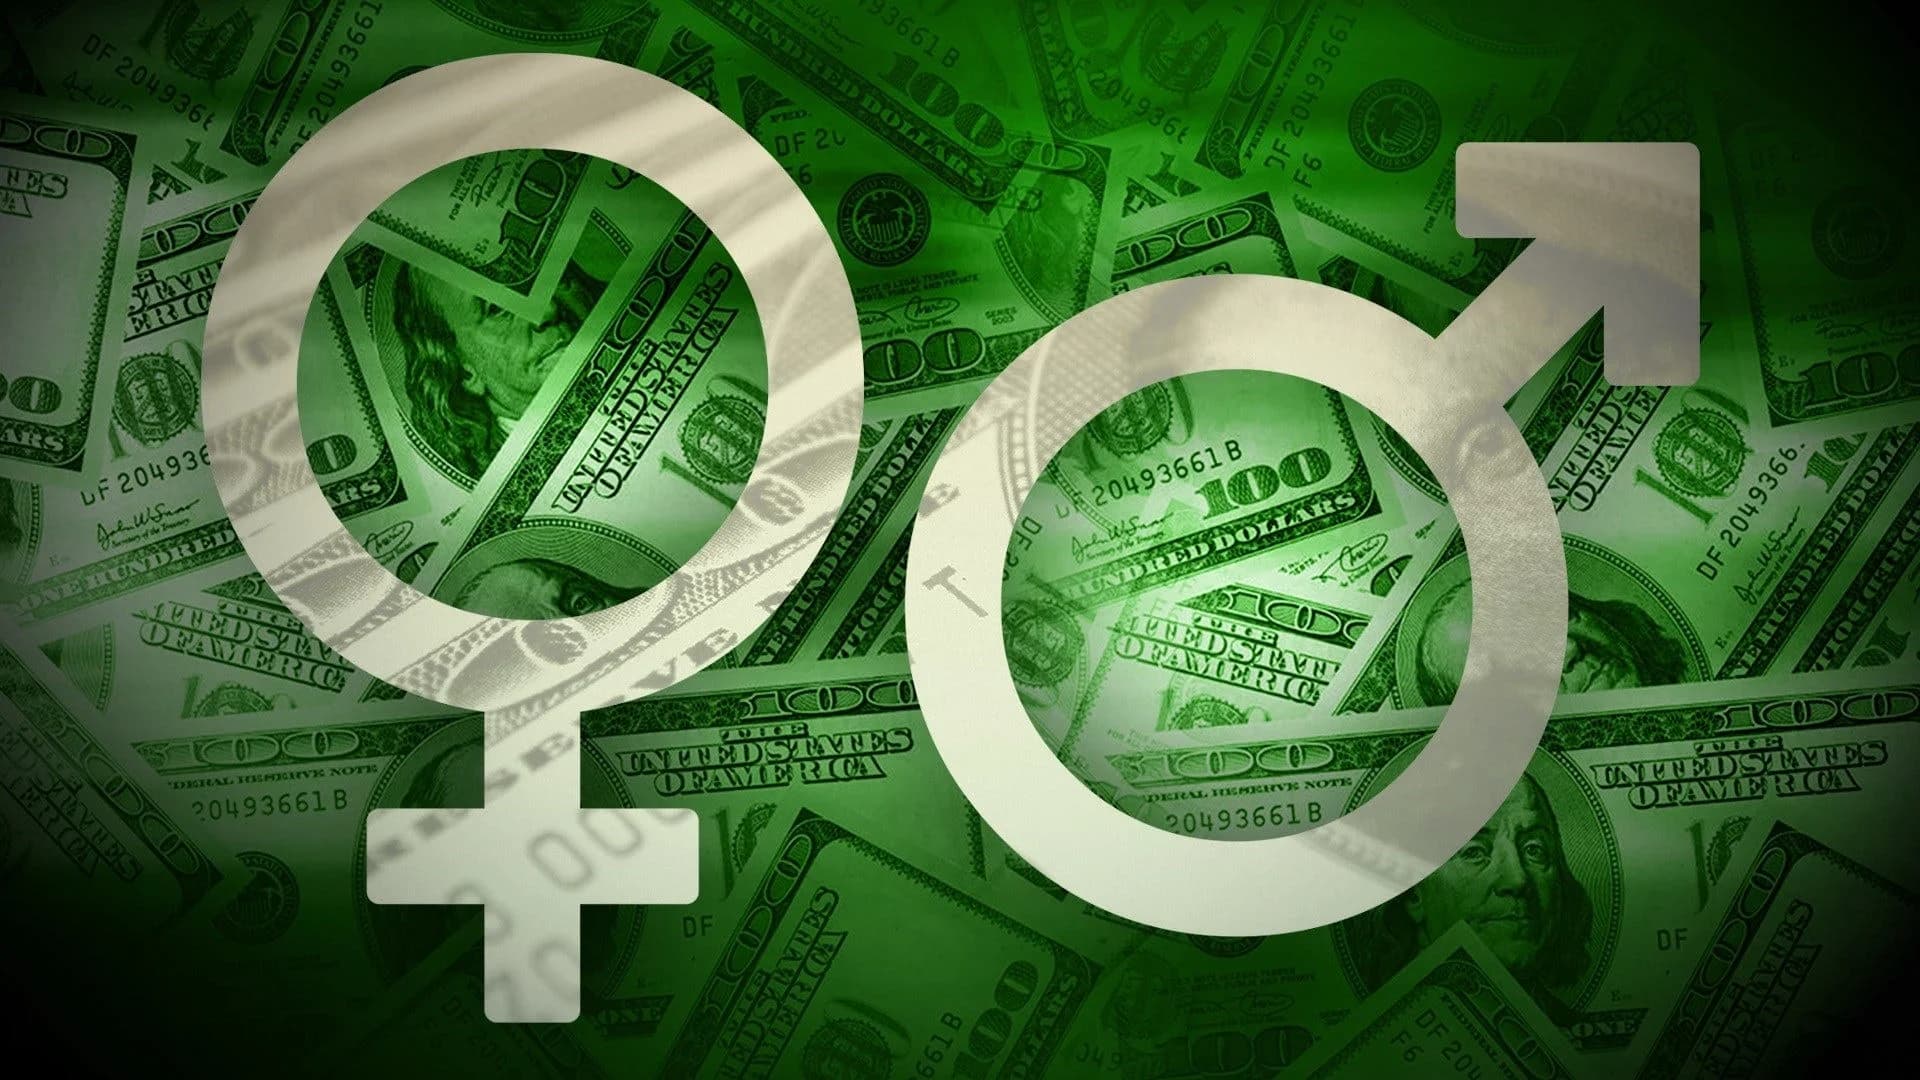 Federal appeals court rules companies can legally pay women less than men for same work